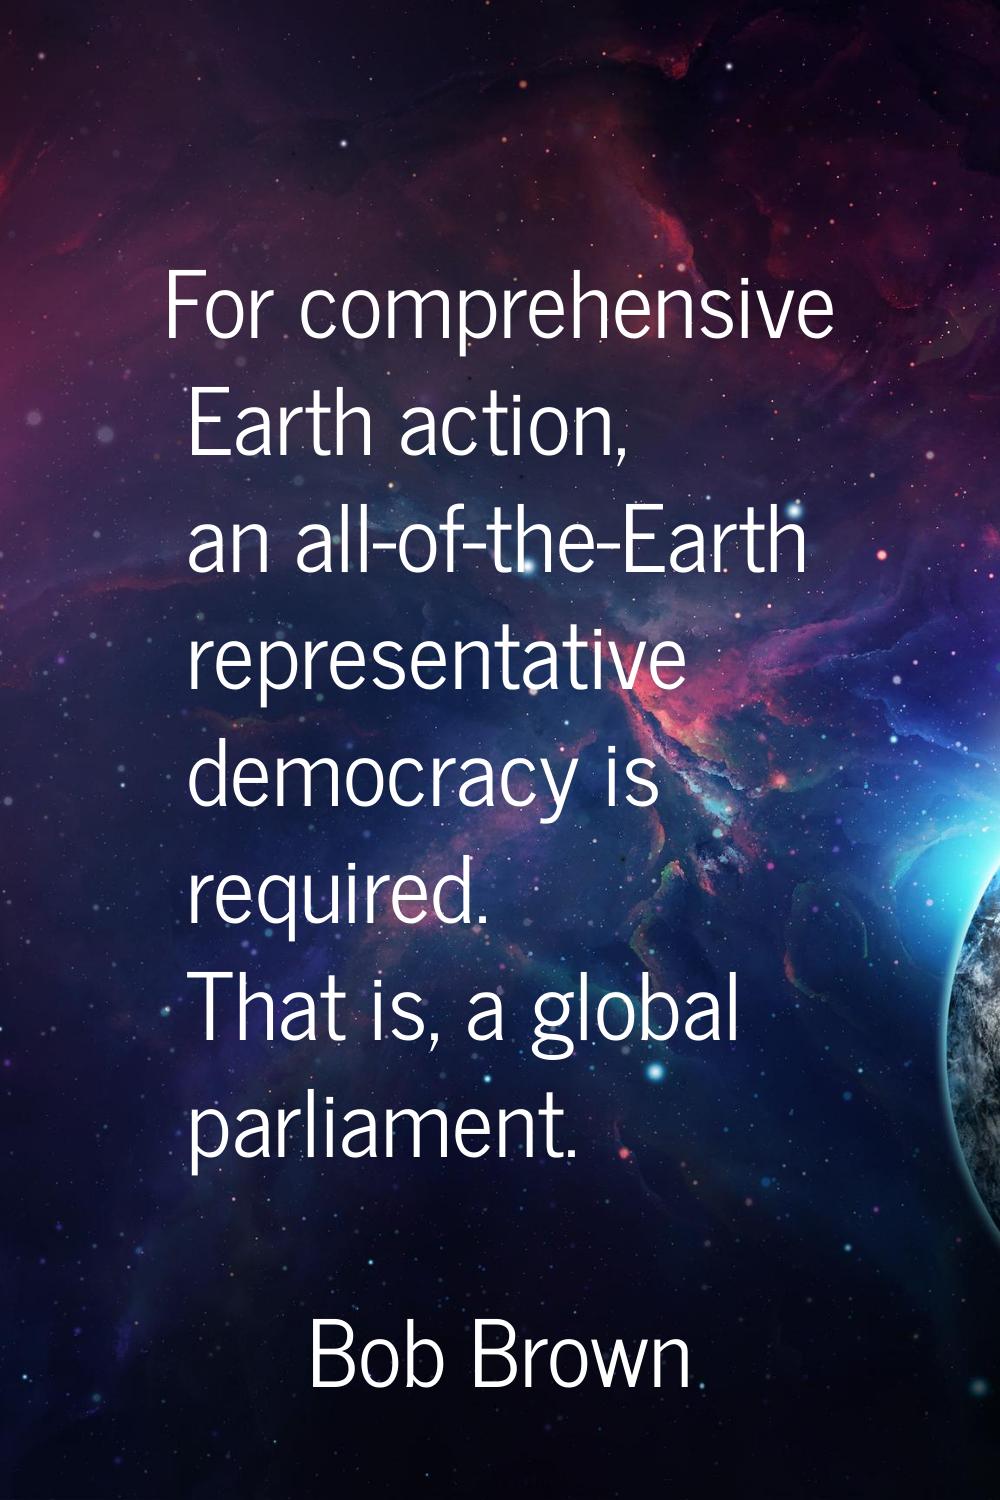 For comprehensive Earth action, an all-of-the-Earth representative democracy is required. That is, 